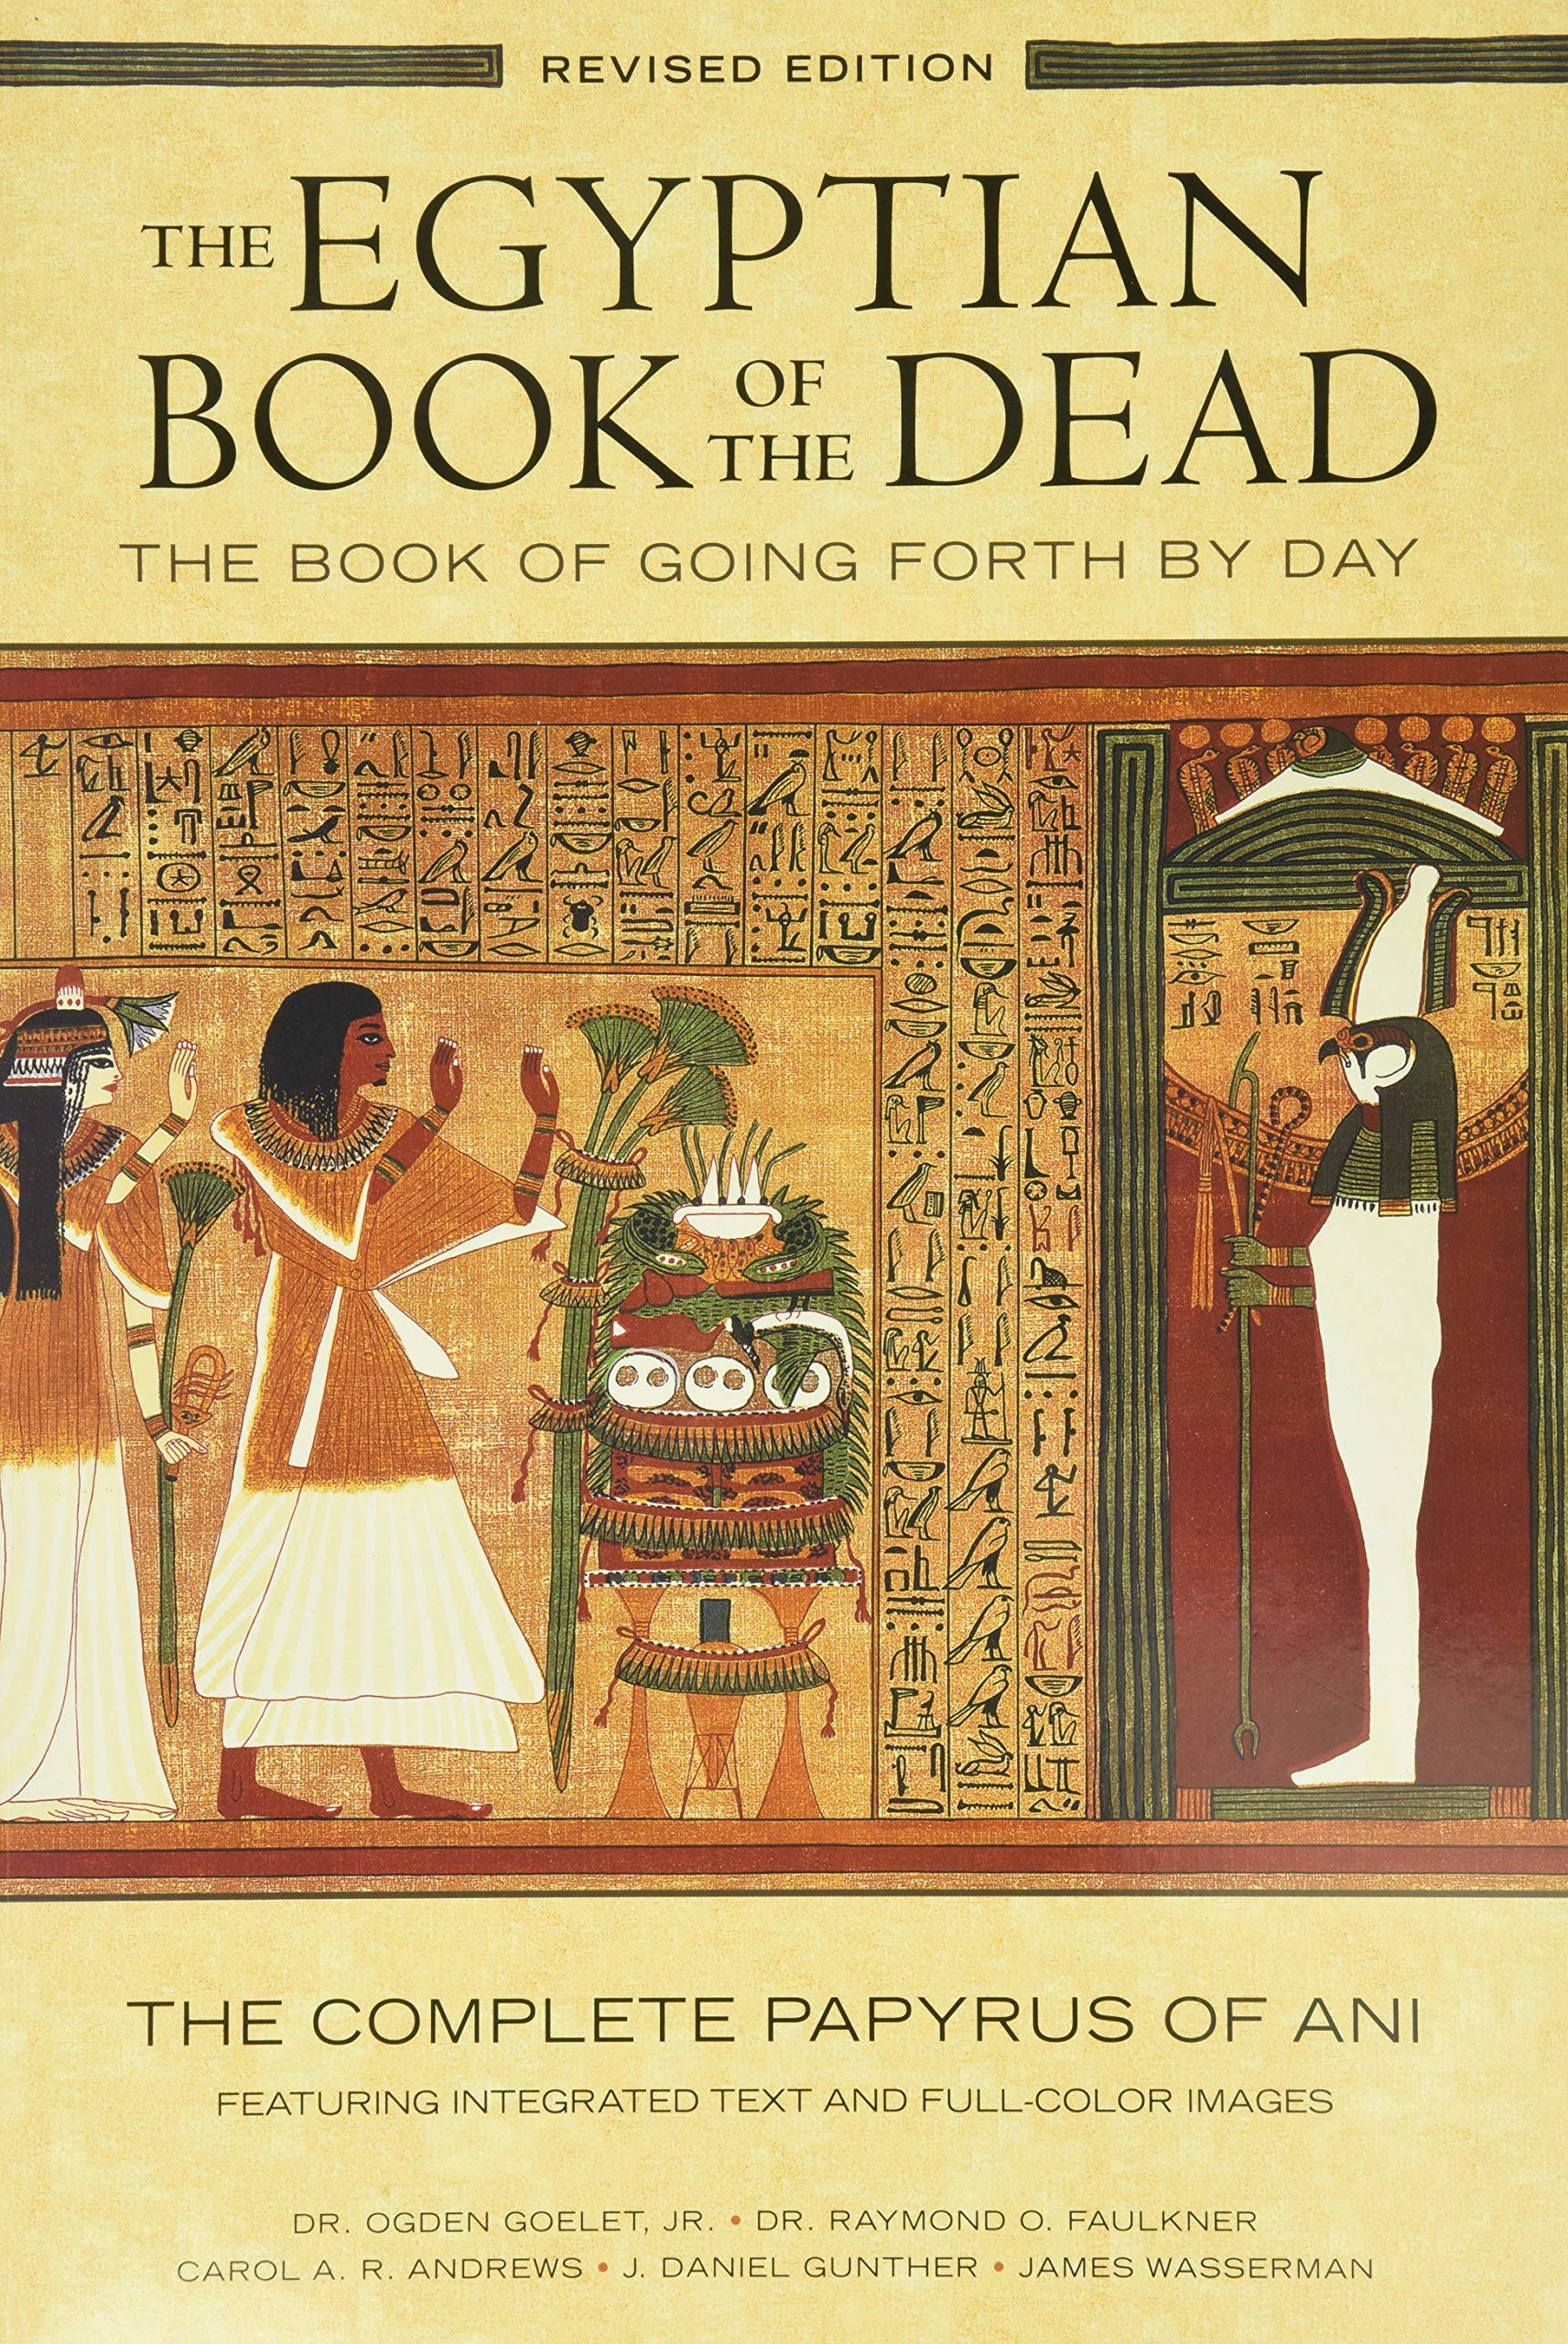 book of the dead assignment